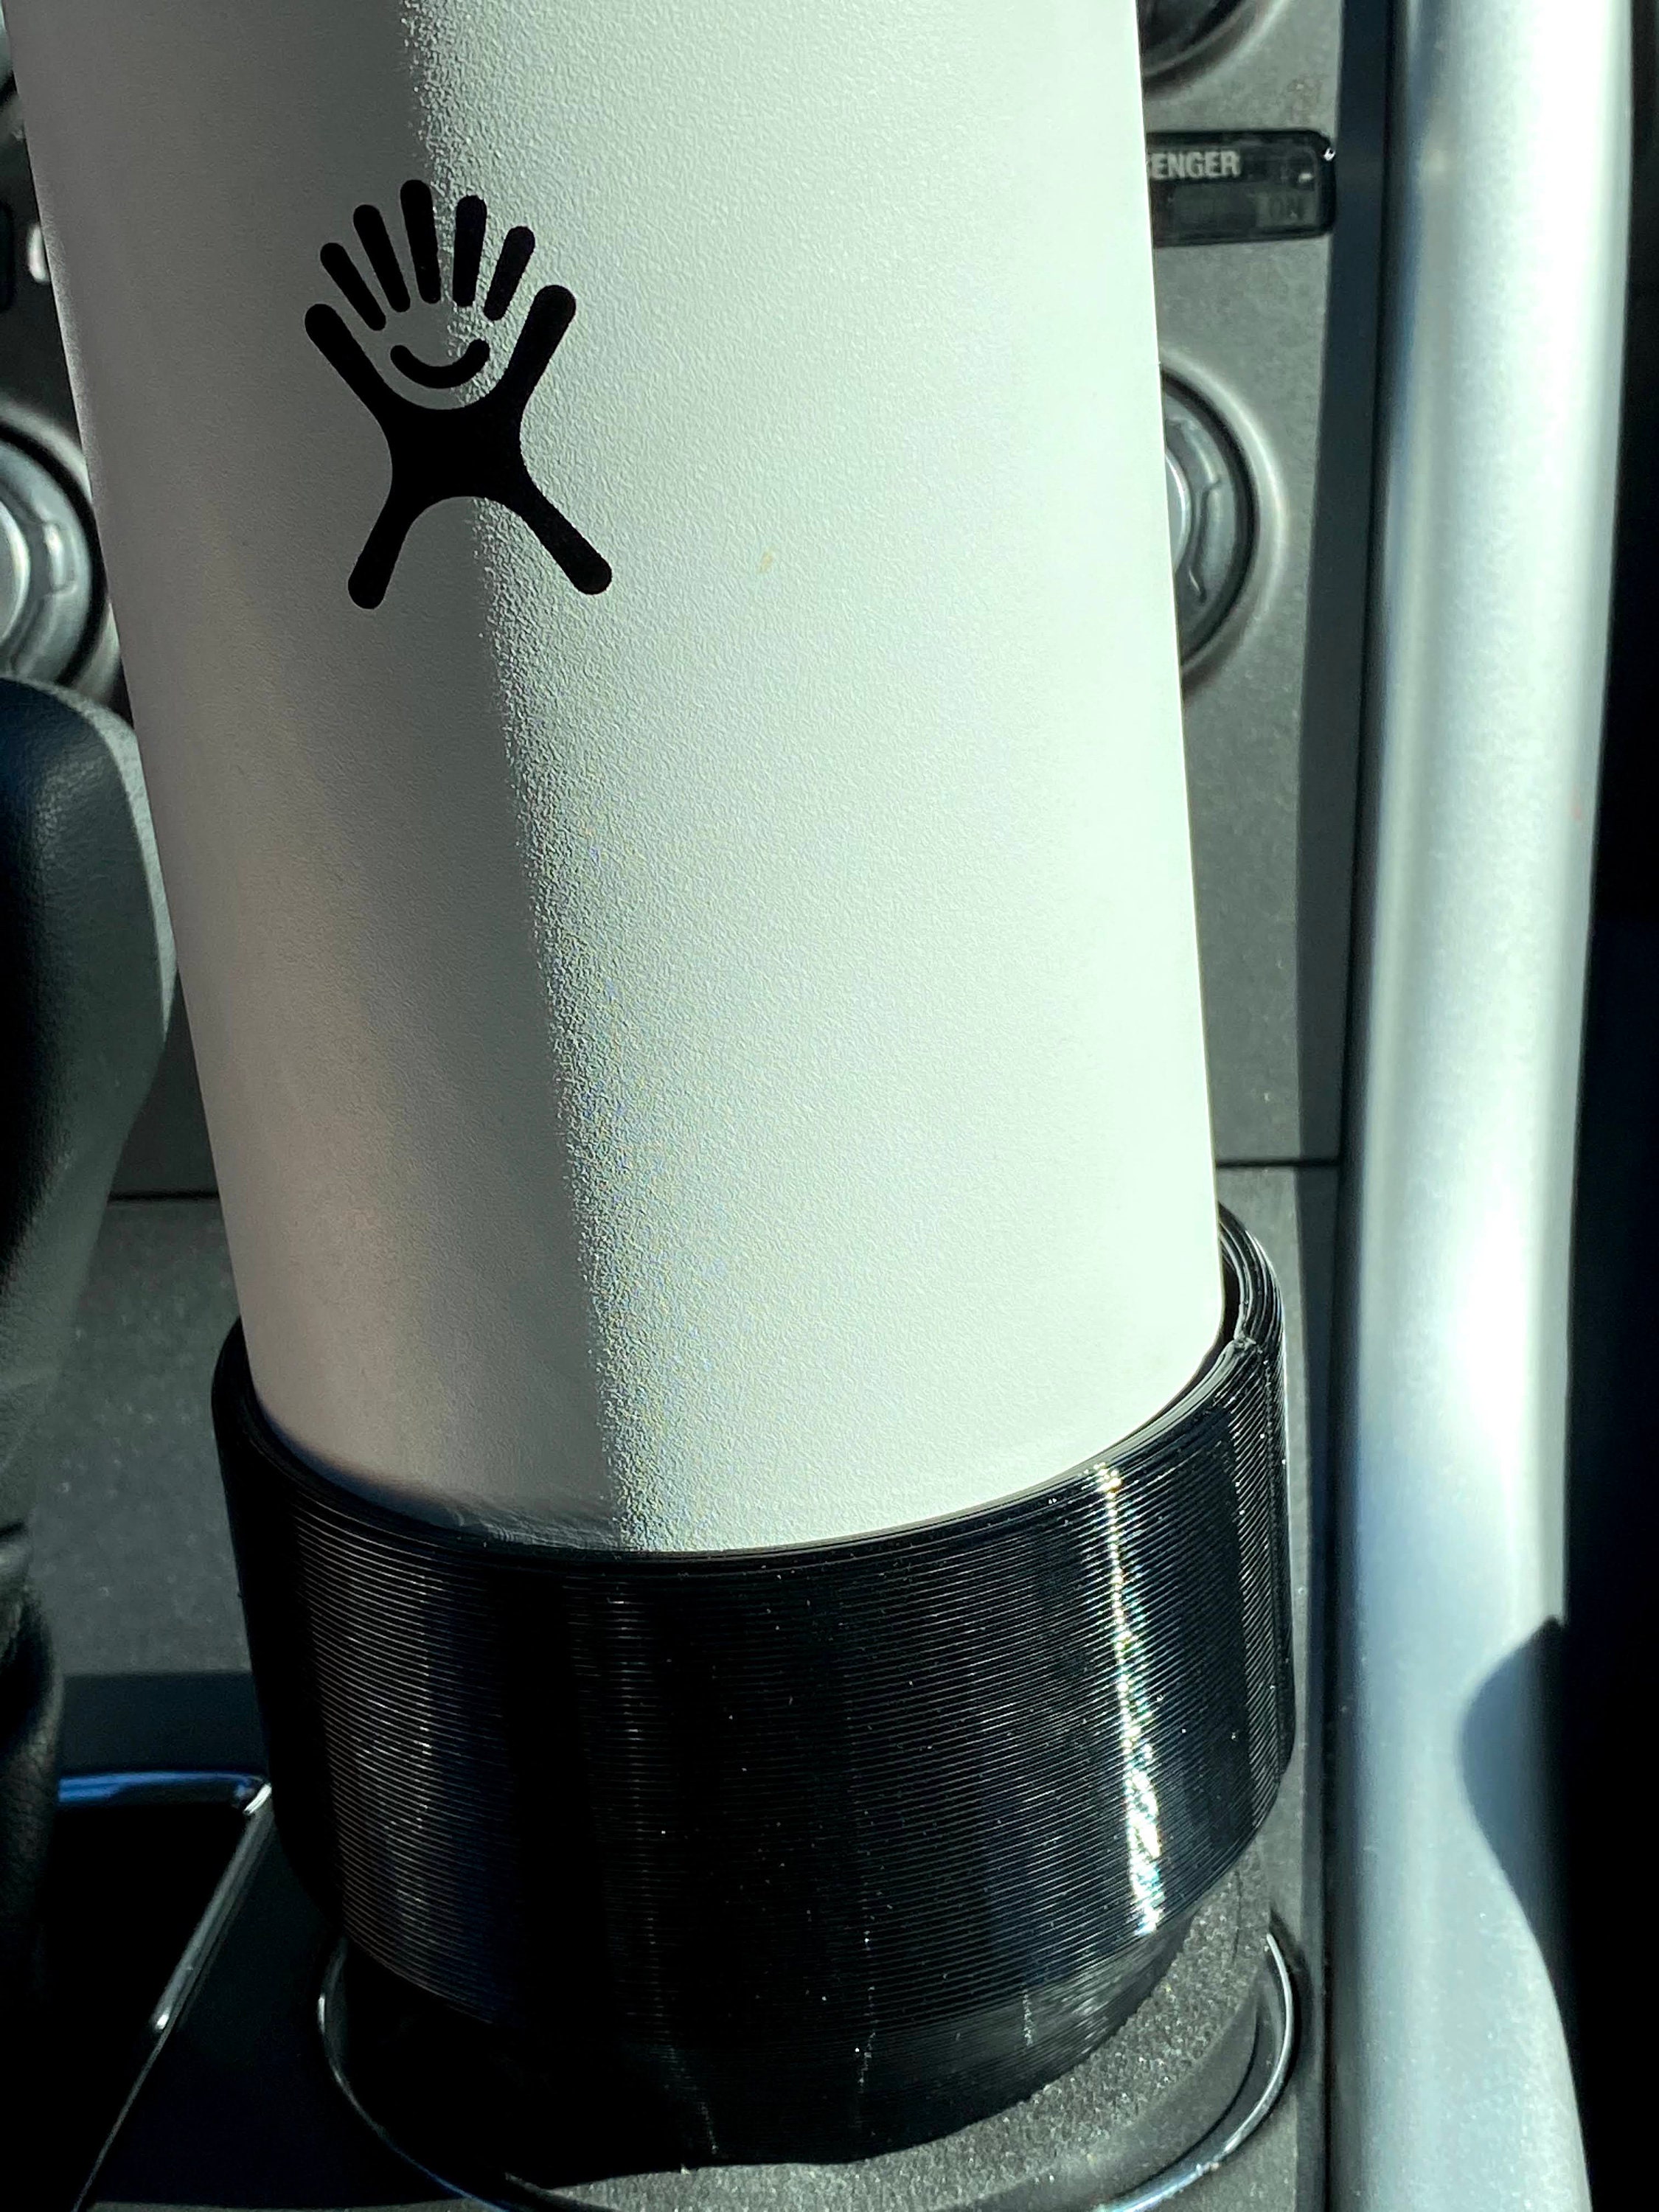 Hydroflask Car Cup Holder Attachment 